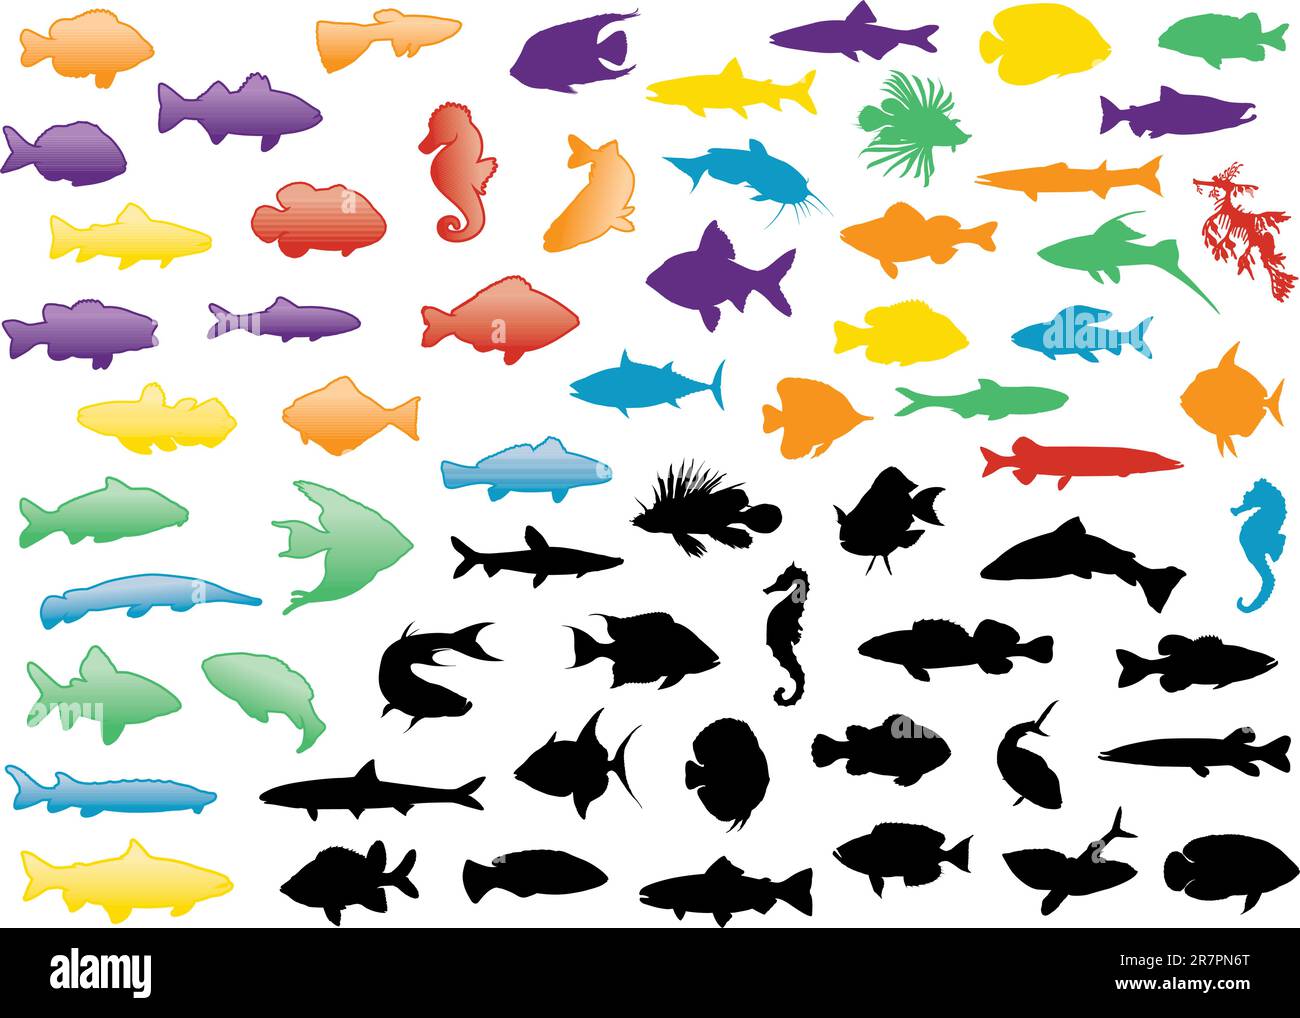 Illustration set of fish silhouettes. All objects are isolated and grouped. Colors and transparent background color are easy to adjust. Stock Vector